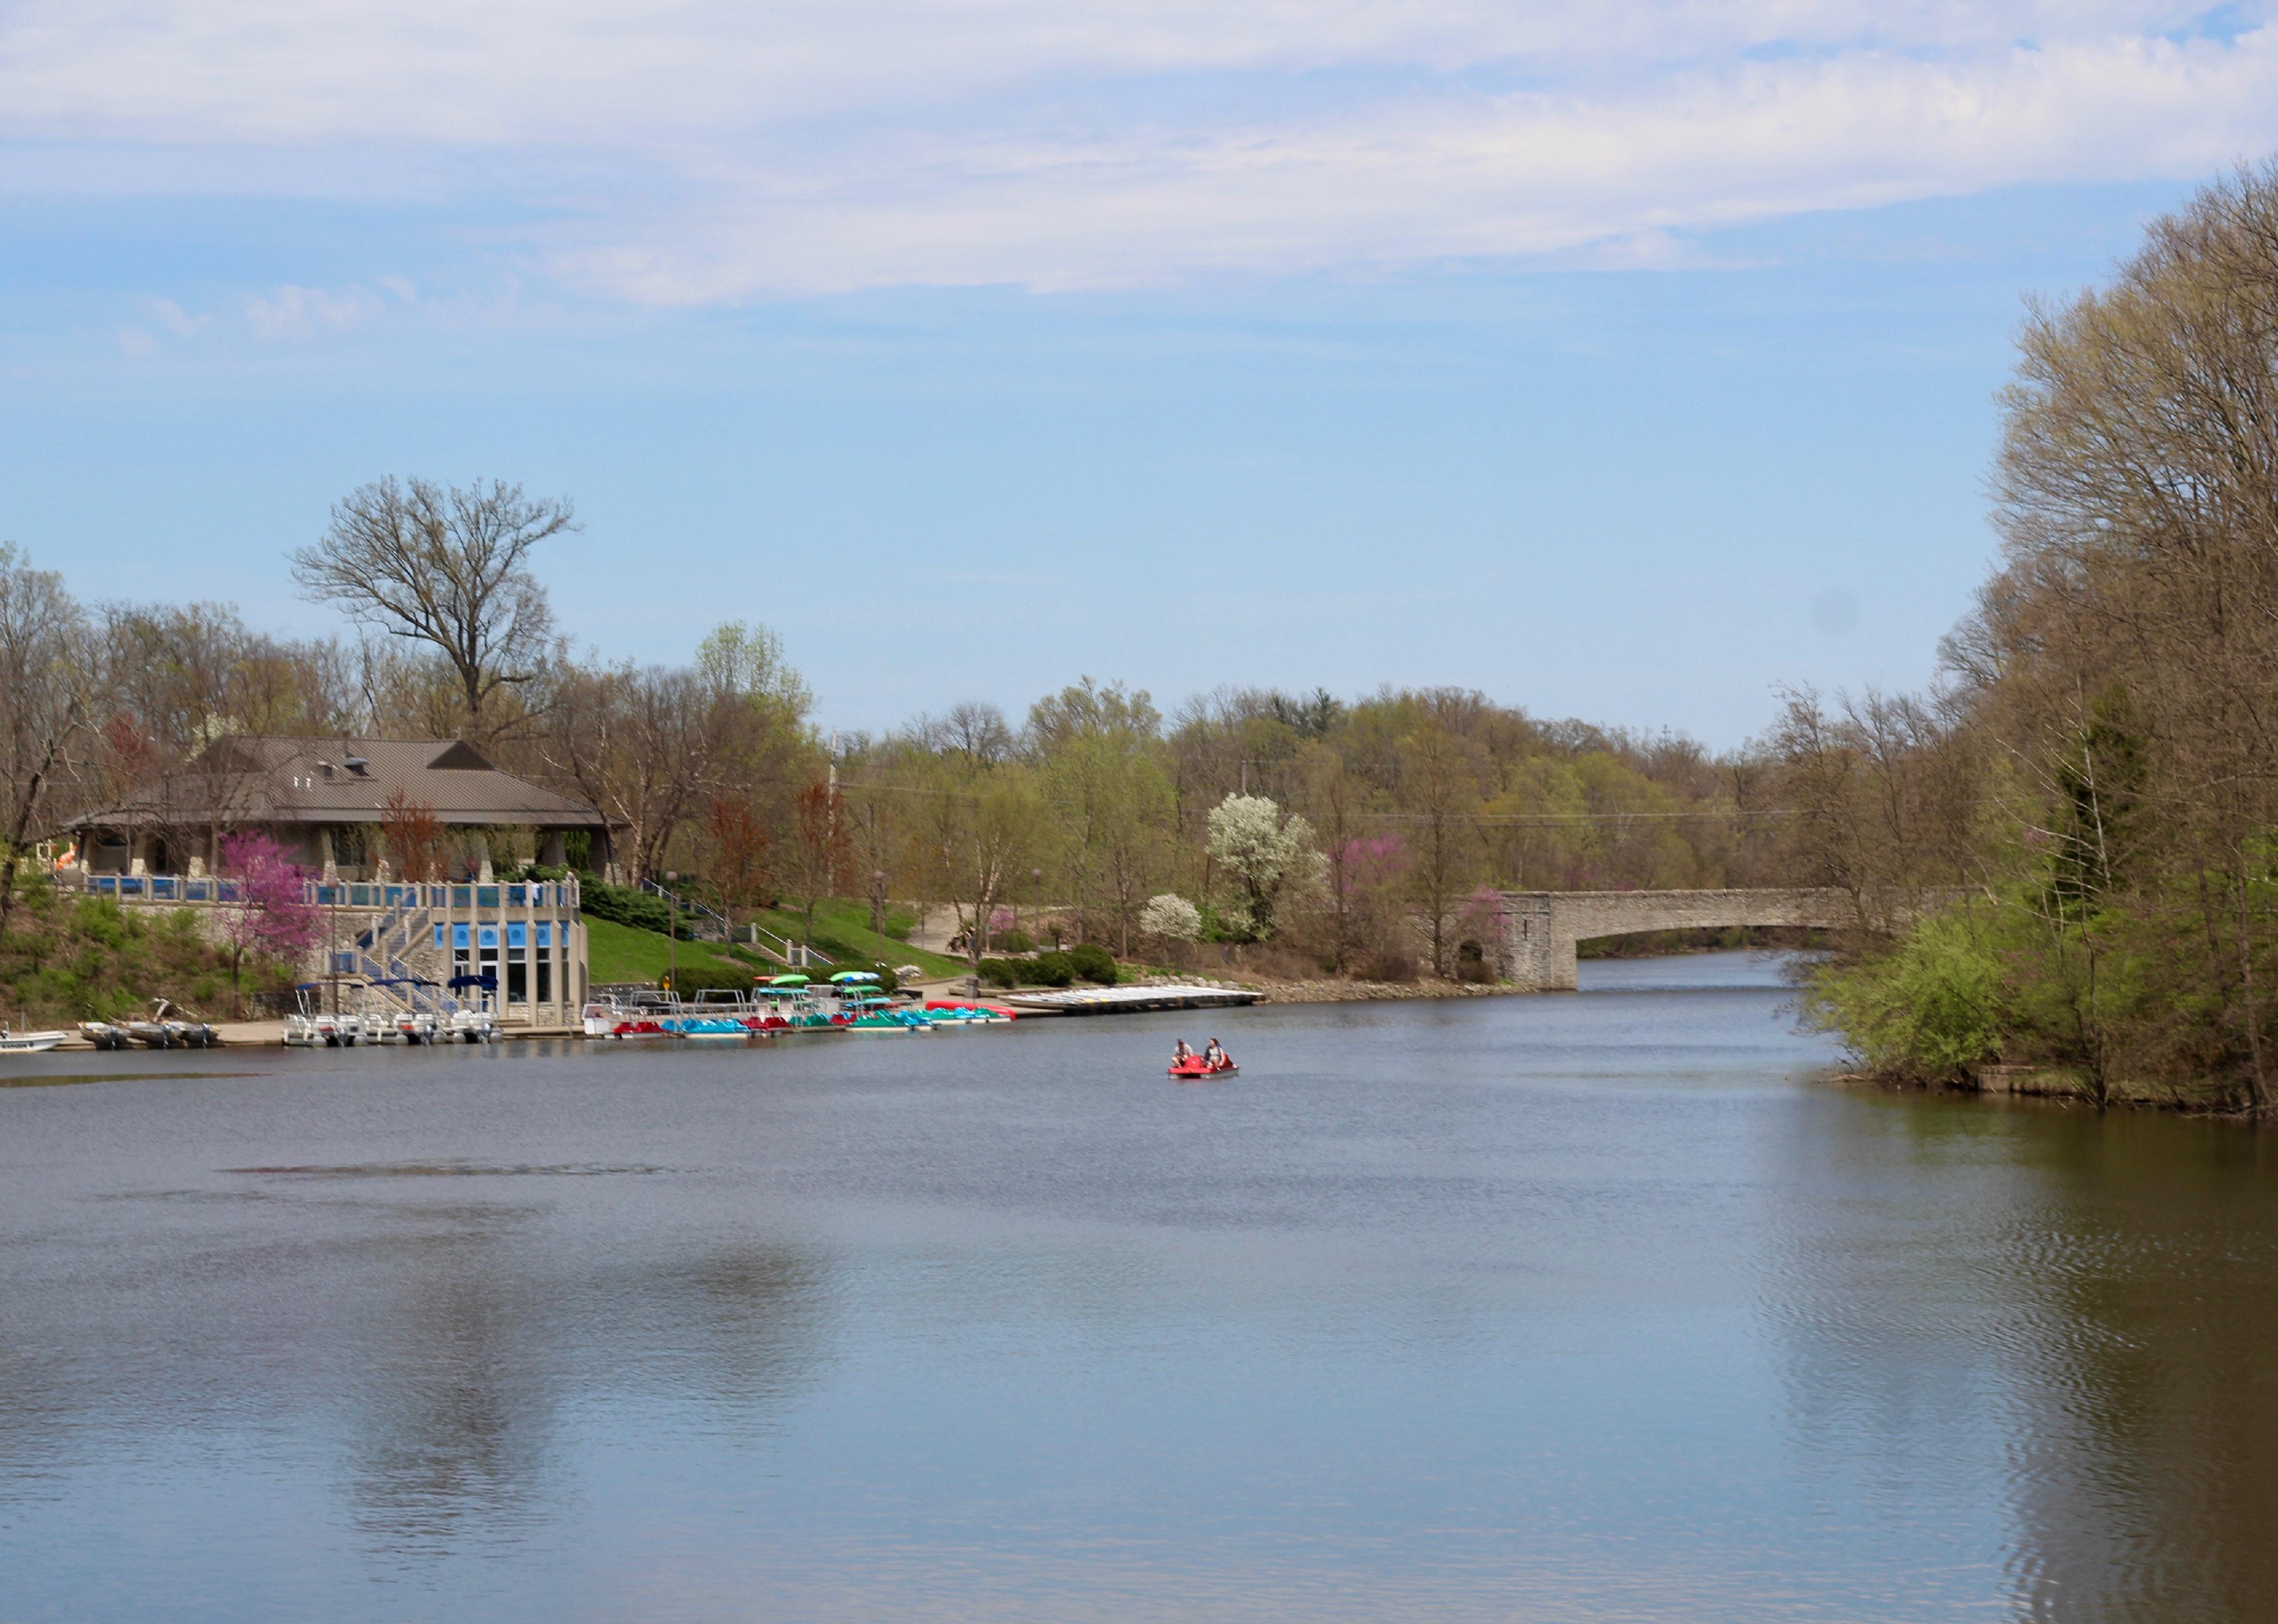 A view of the lake and a boathouse at a park in Hamilton County Ohio